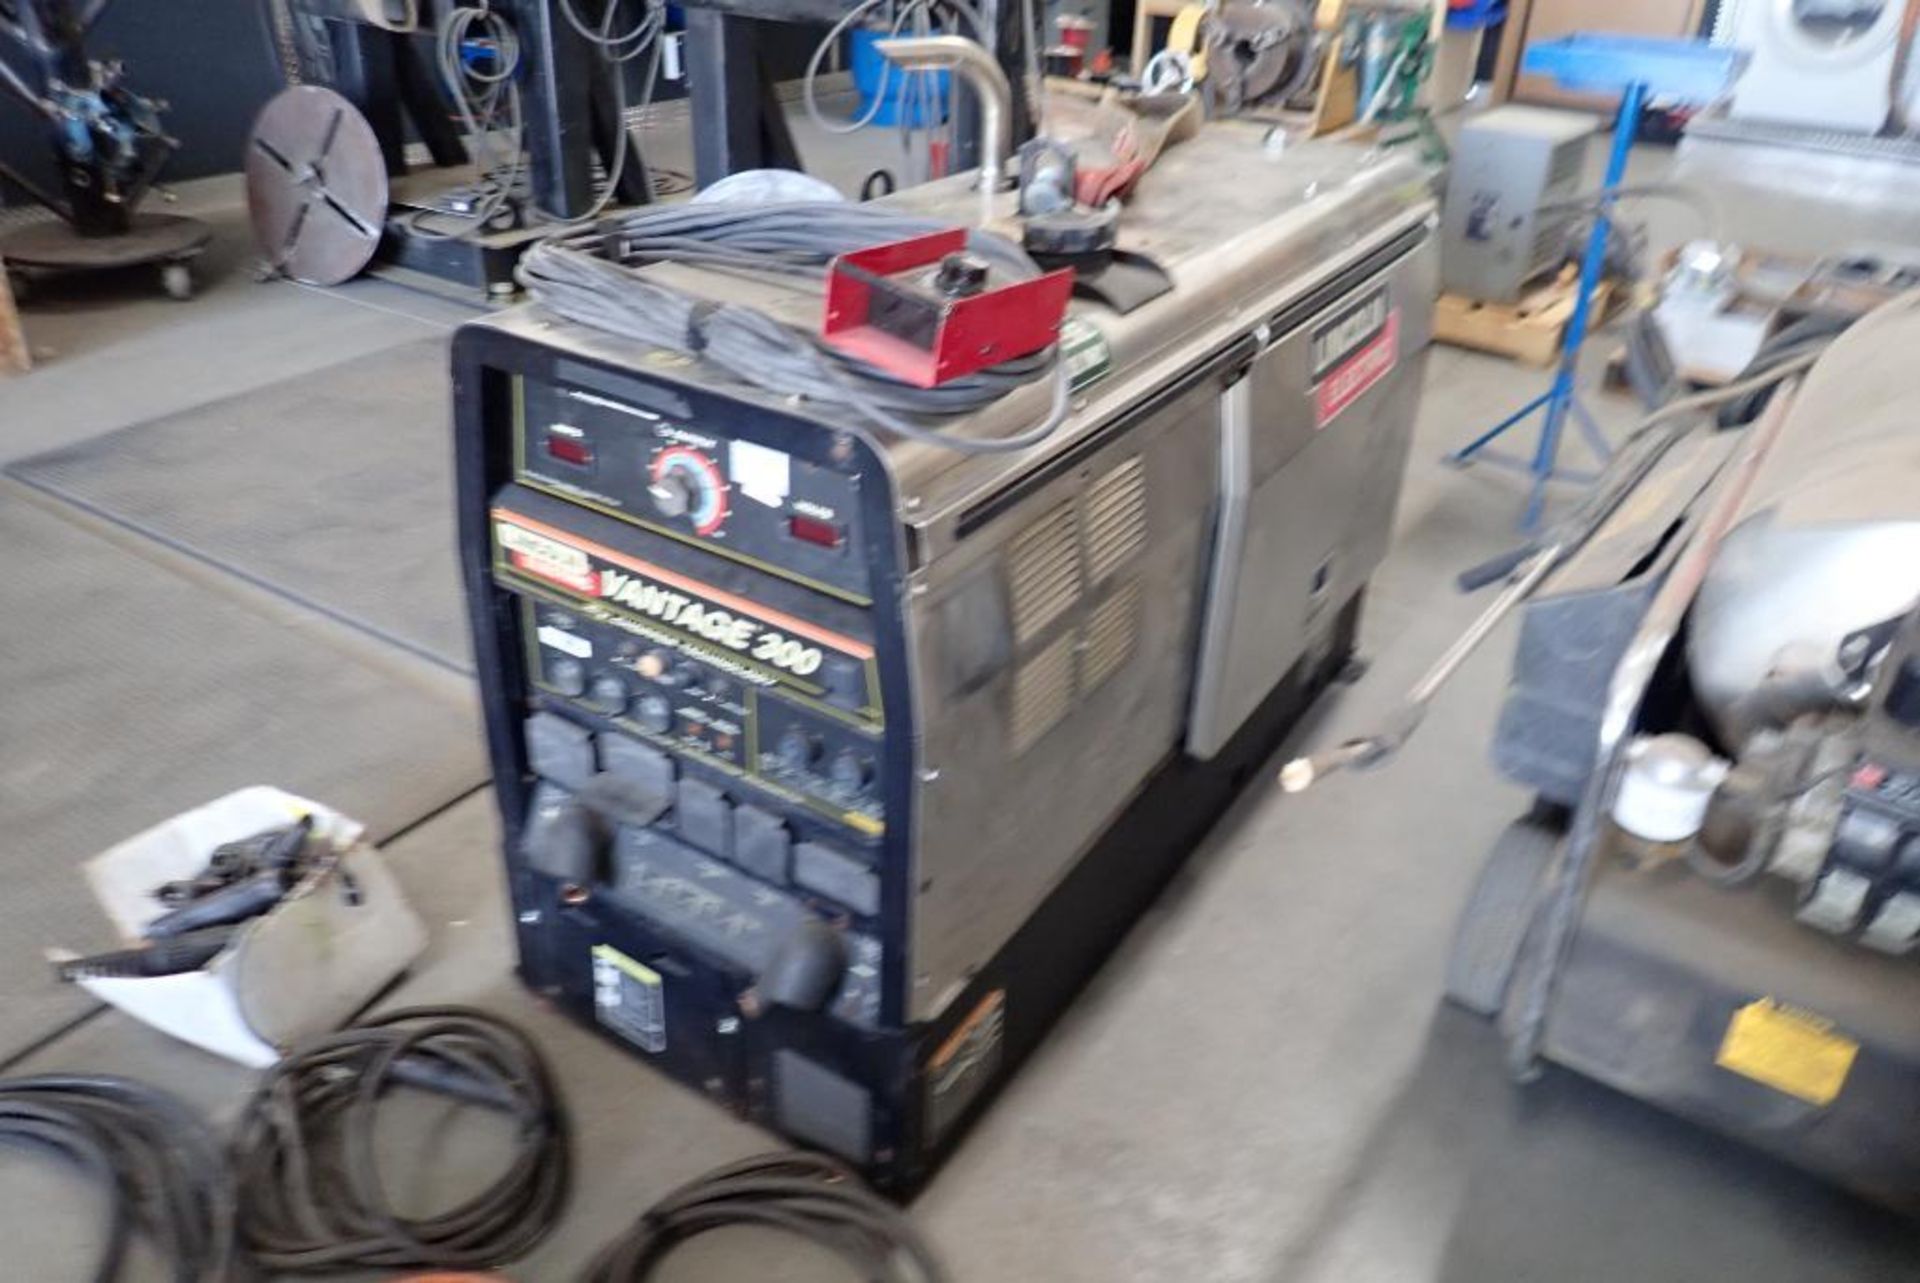 2007 Lincoln Electric Vantage 300 Diesel Portable Welder w/ Remote, Showing 2,079hrs SN U1070908955. - Image 2 of 8